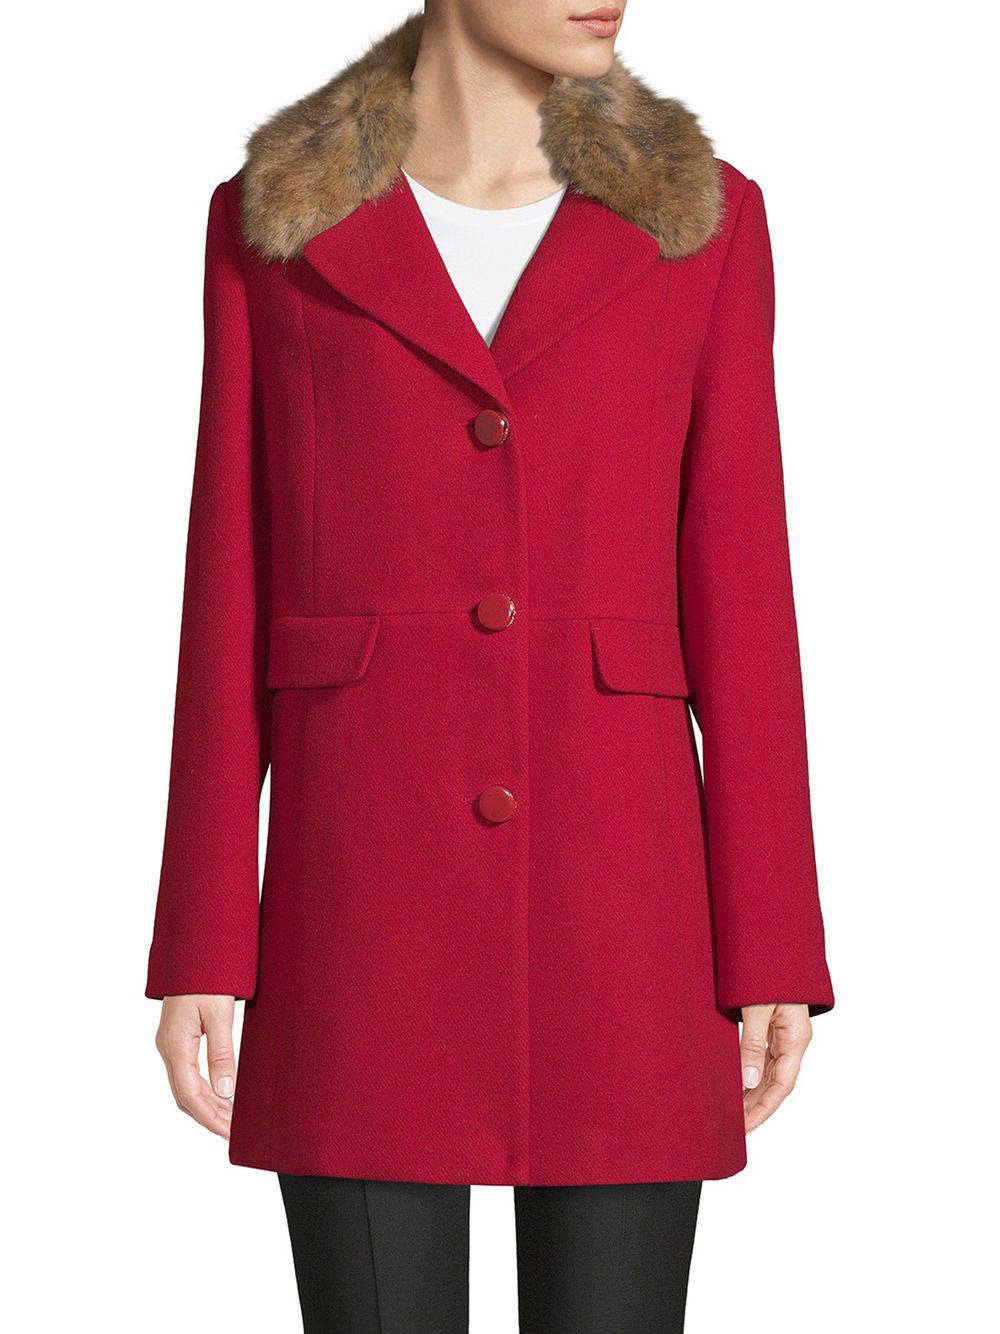 Kate Spade Faux Fur-trimmed Notch Collar Car Coat in Red - Lyst